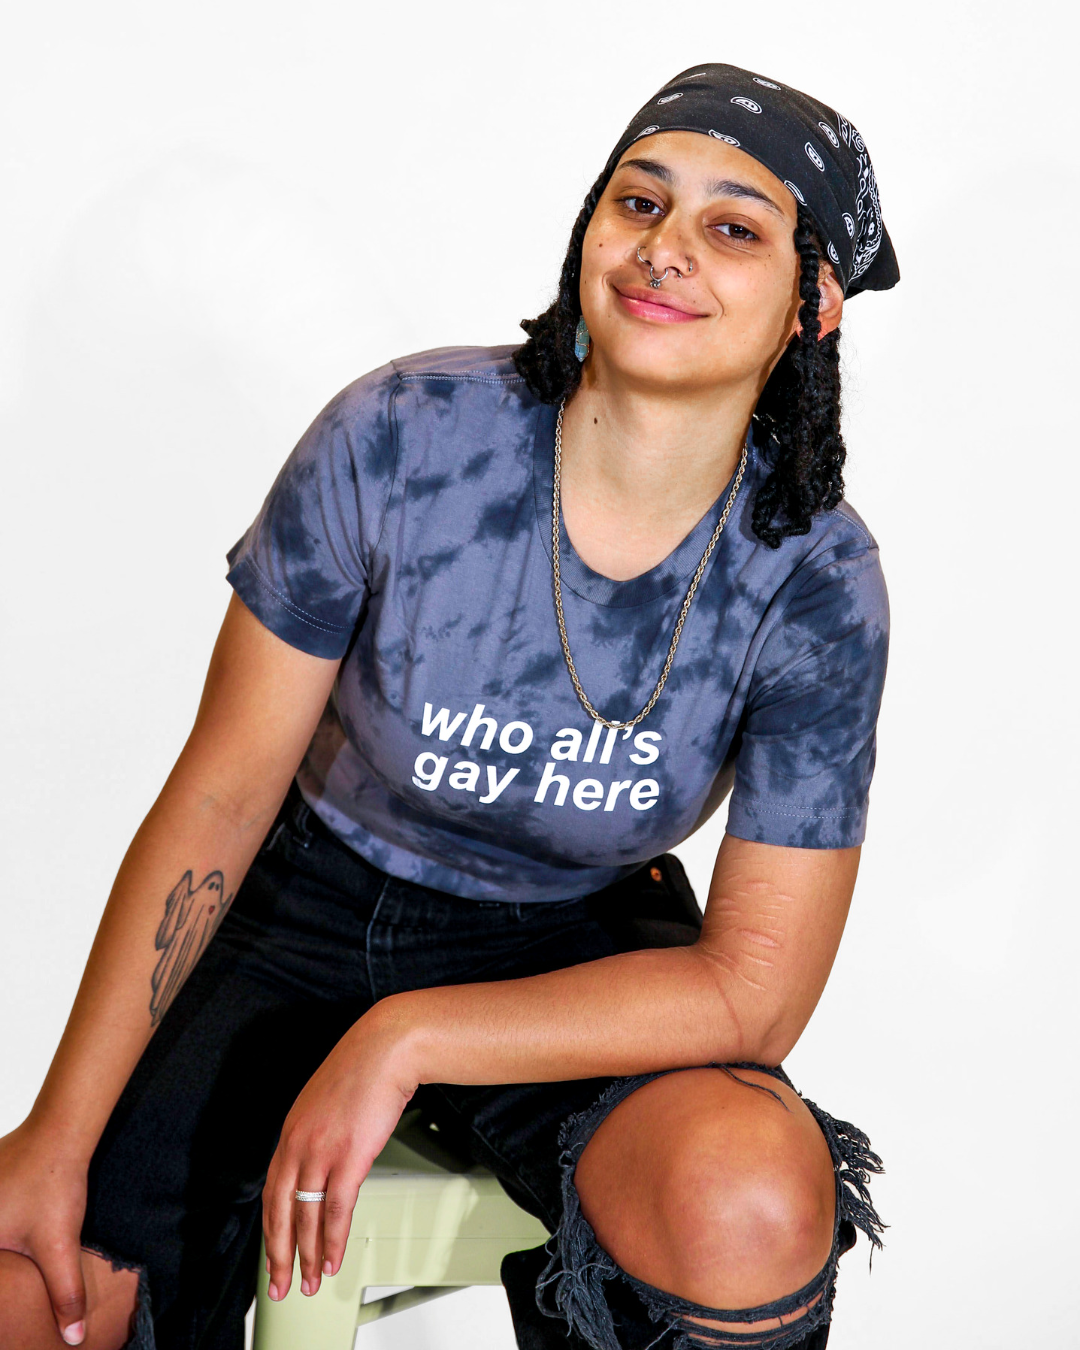 Model Grey is wearing the Who All's Gay Here Tie-Dye Tee in size S. They are 5'4" and their bra size is 32D. The tee is black and grey in a tie-dyed pattern. There is white sans-serif text that says "Who All's Gay Here." The text is askew at a diagonal in two lines. The design is by Erin Sullivan.